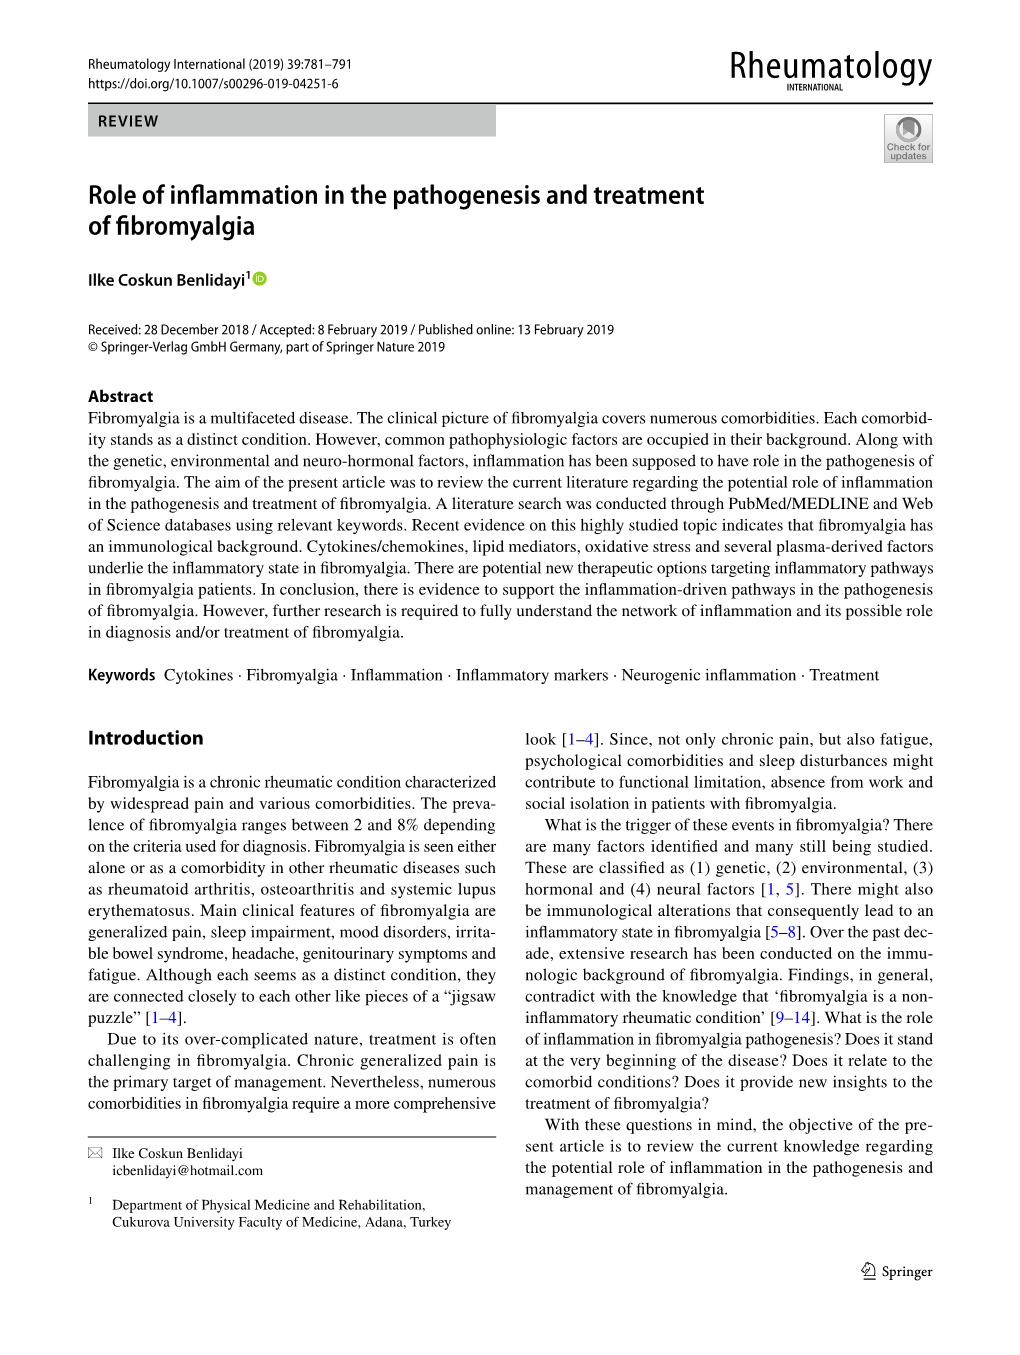 Role of Inflammation in the Pathogenesis and Treatment of Fibromyalgia